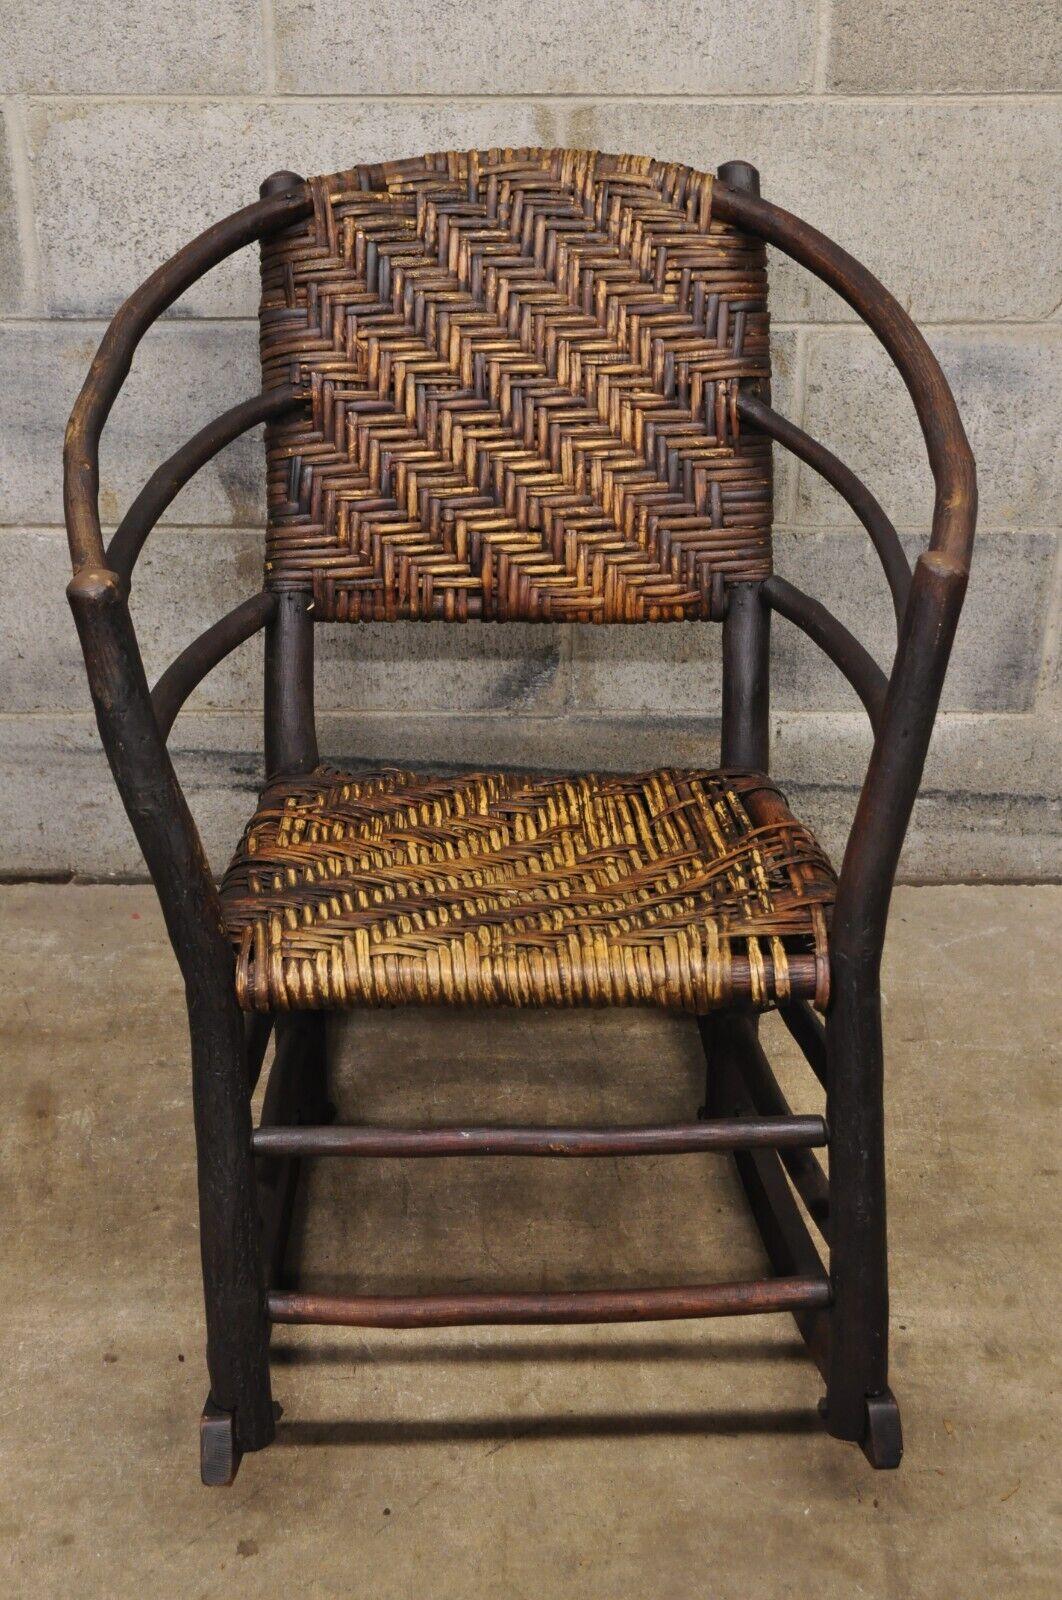 Vintage Adirondack old hickory style tree branch wood frame rattan rocking chair. Item features a woven rattan back and seat, nice wide frame, solid wood construction, distressed finish, very nice vintage item. Circa Early to mid 1900s.